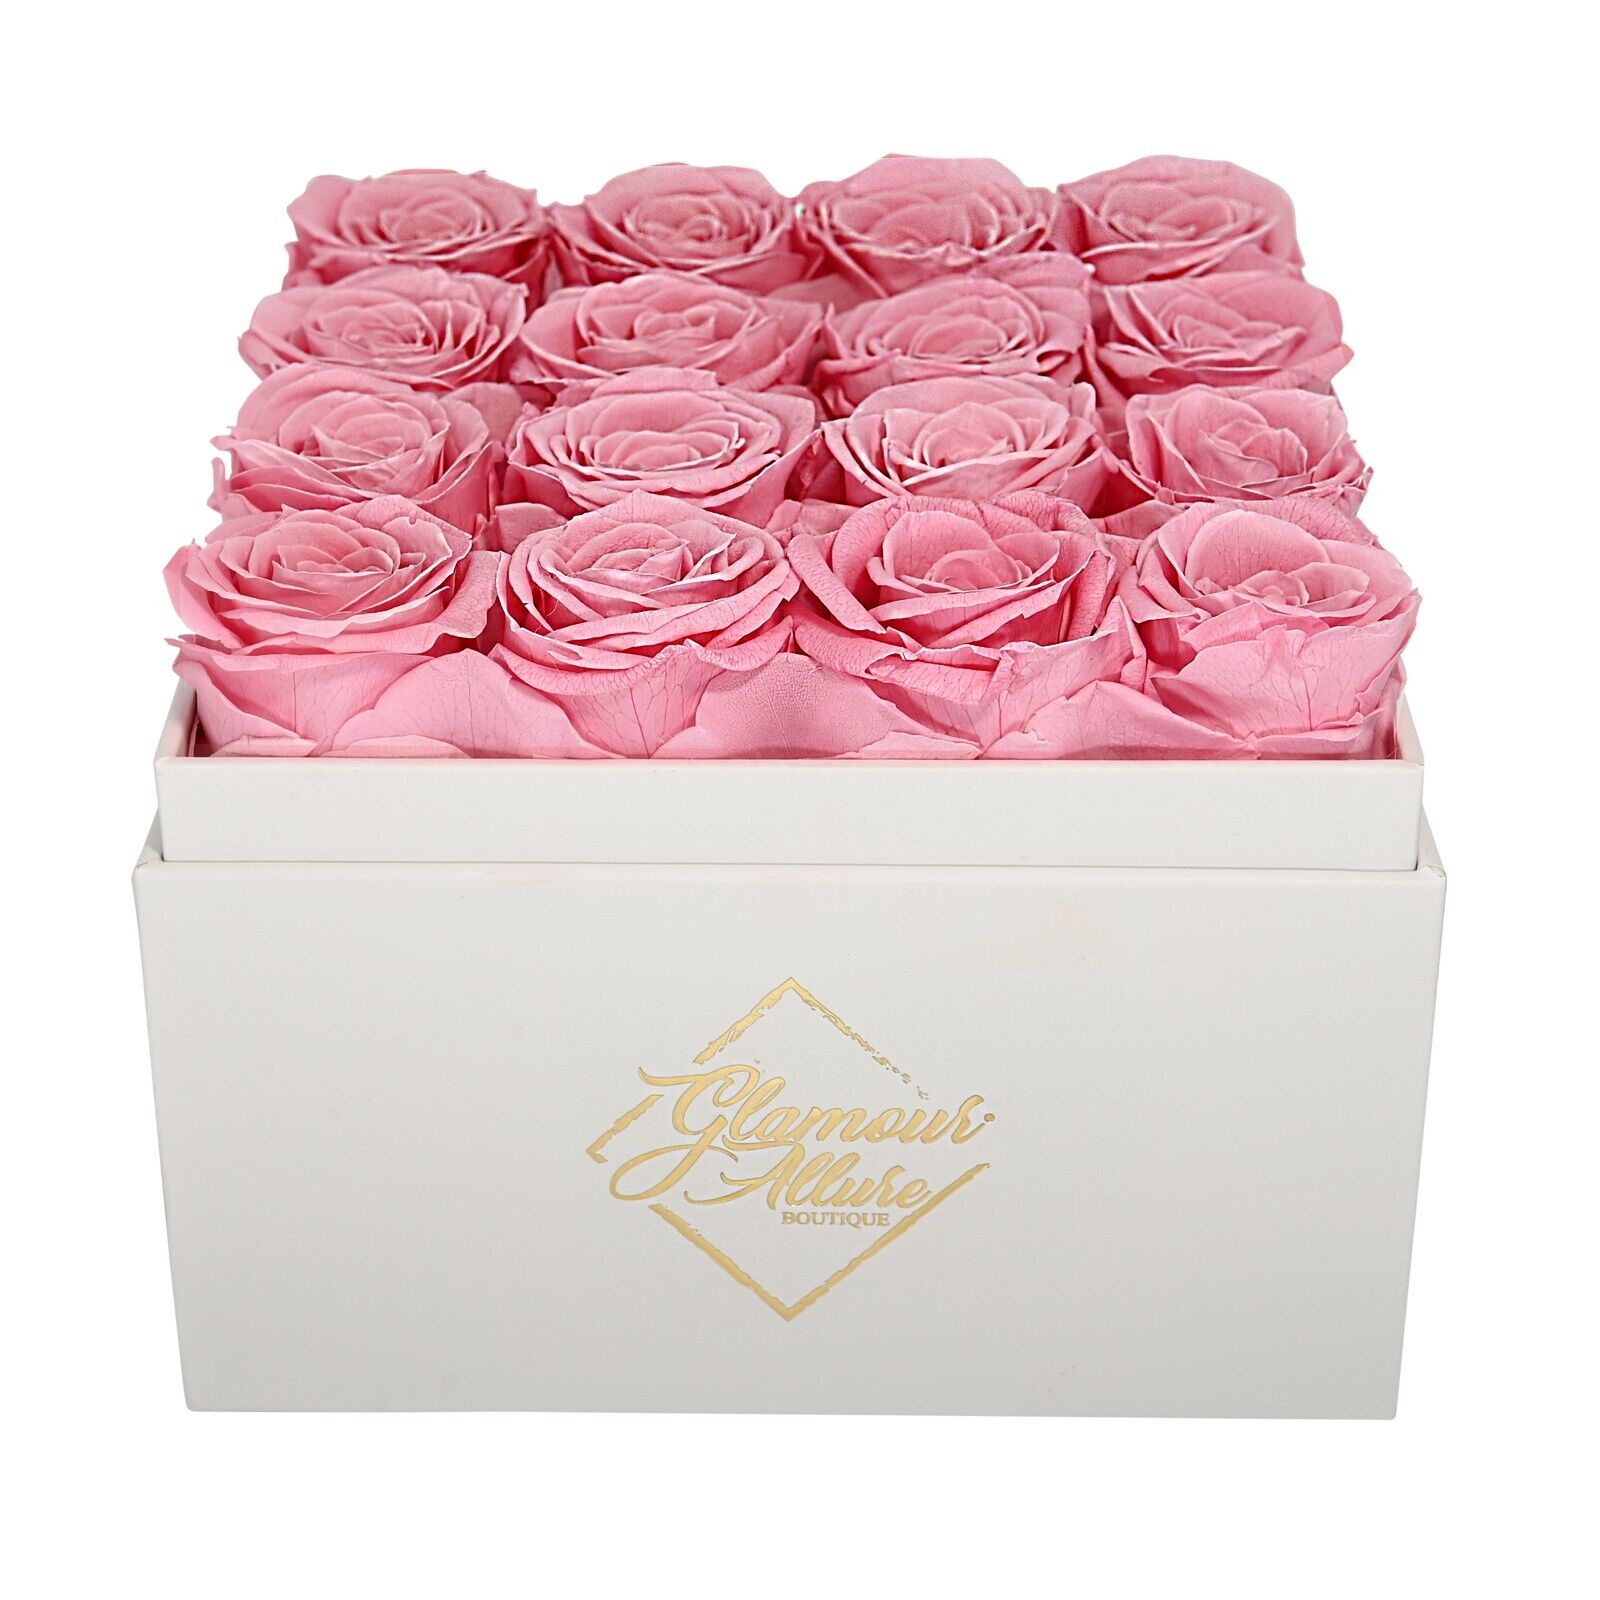 Handmade Preserved Real Roses in a Gift Box - 16 roses - Preserved Flowers Glamour Allure Boutoque - фотография #5